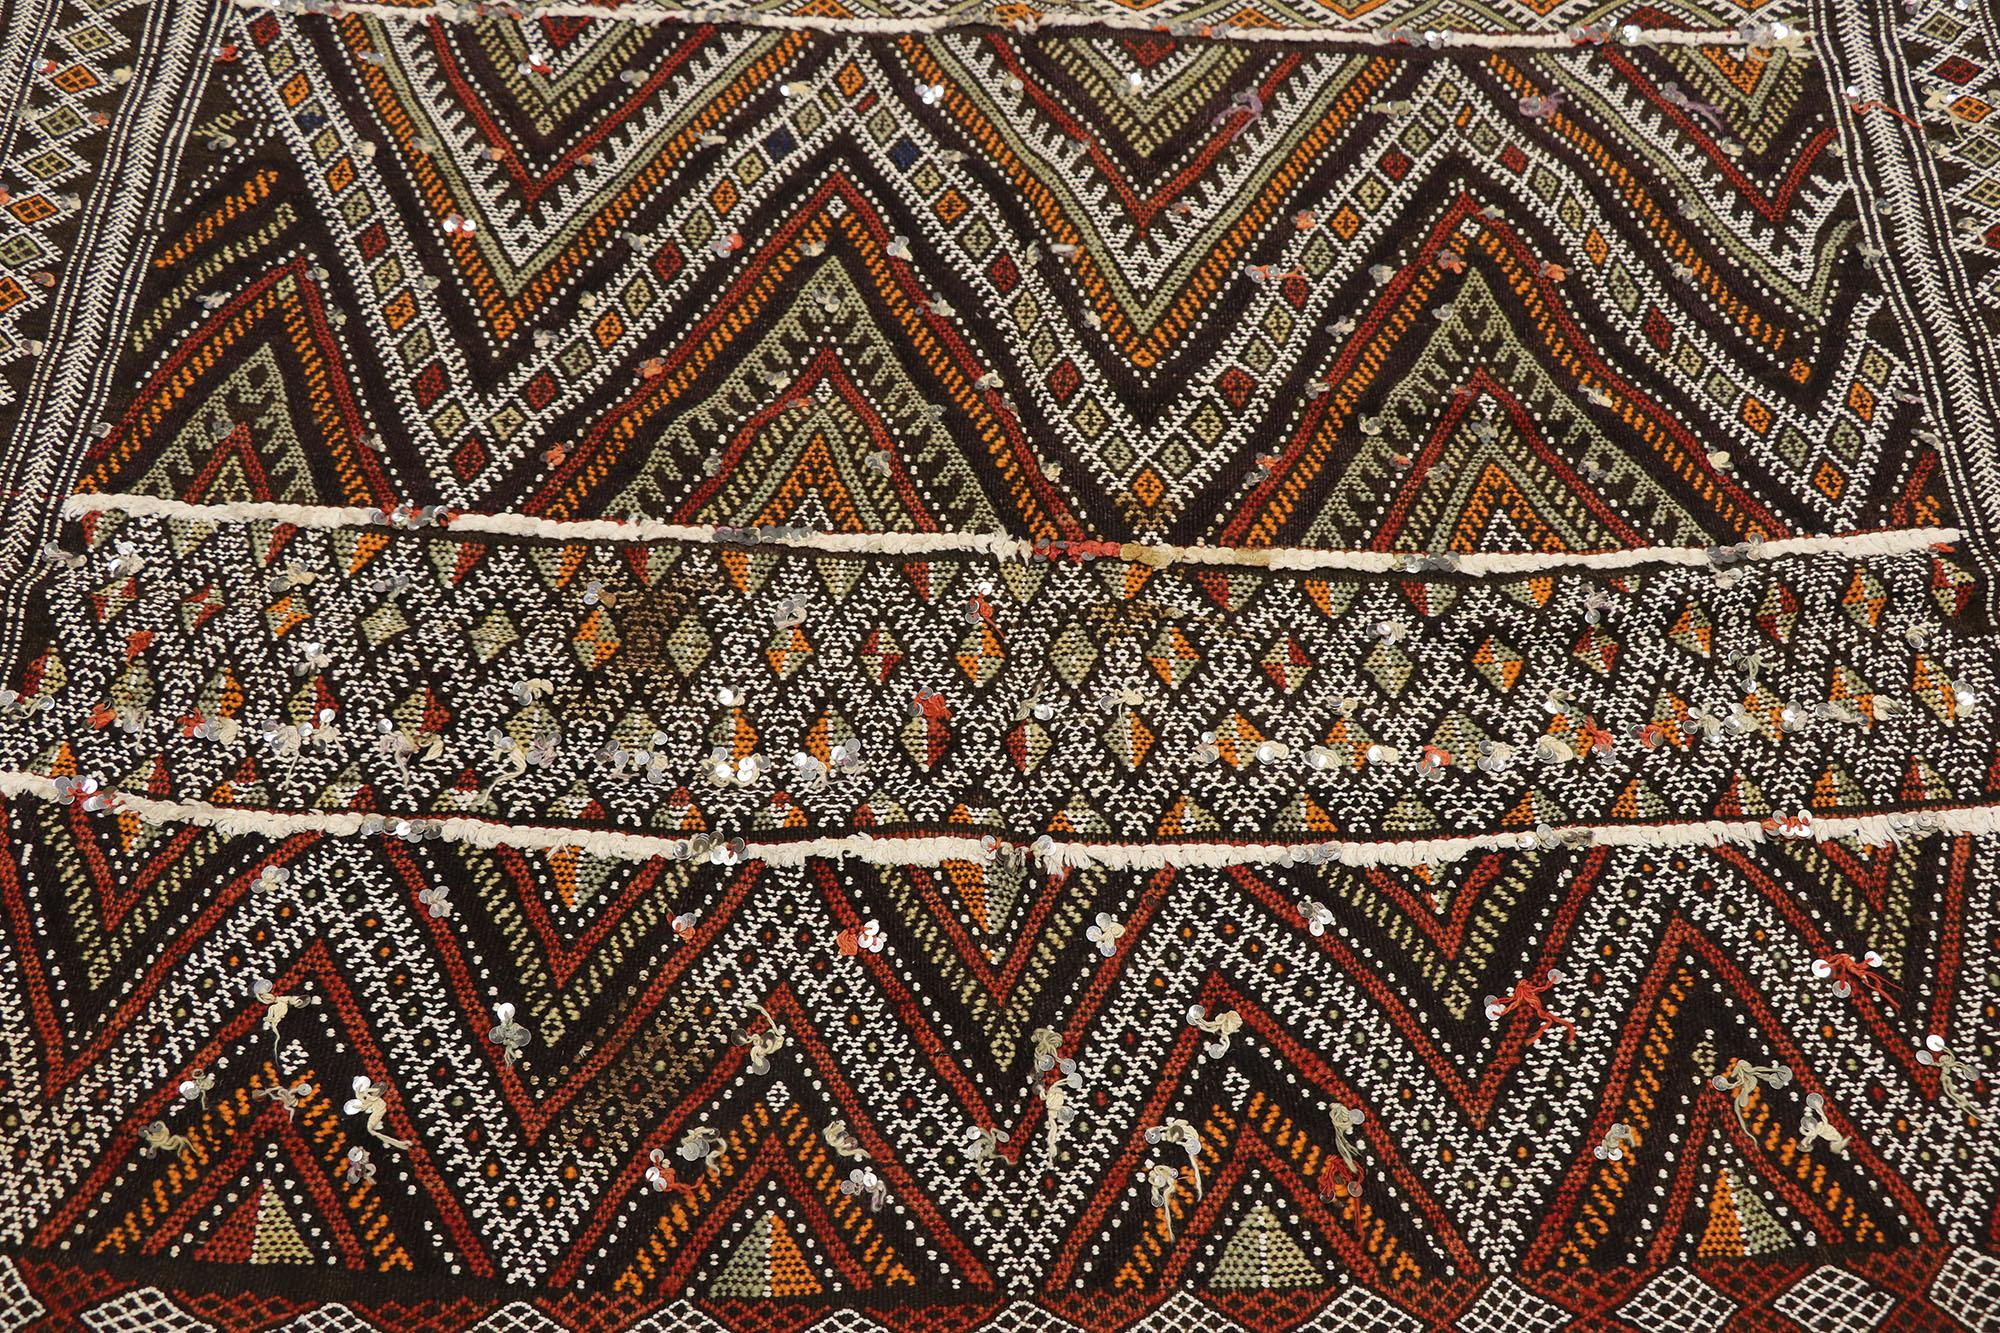 Vintage Zemmour Moroccan Kilim Runner with Sequins and Tribal Boho Chic Style In Good Condition For Sale In Dallas, TX